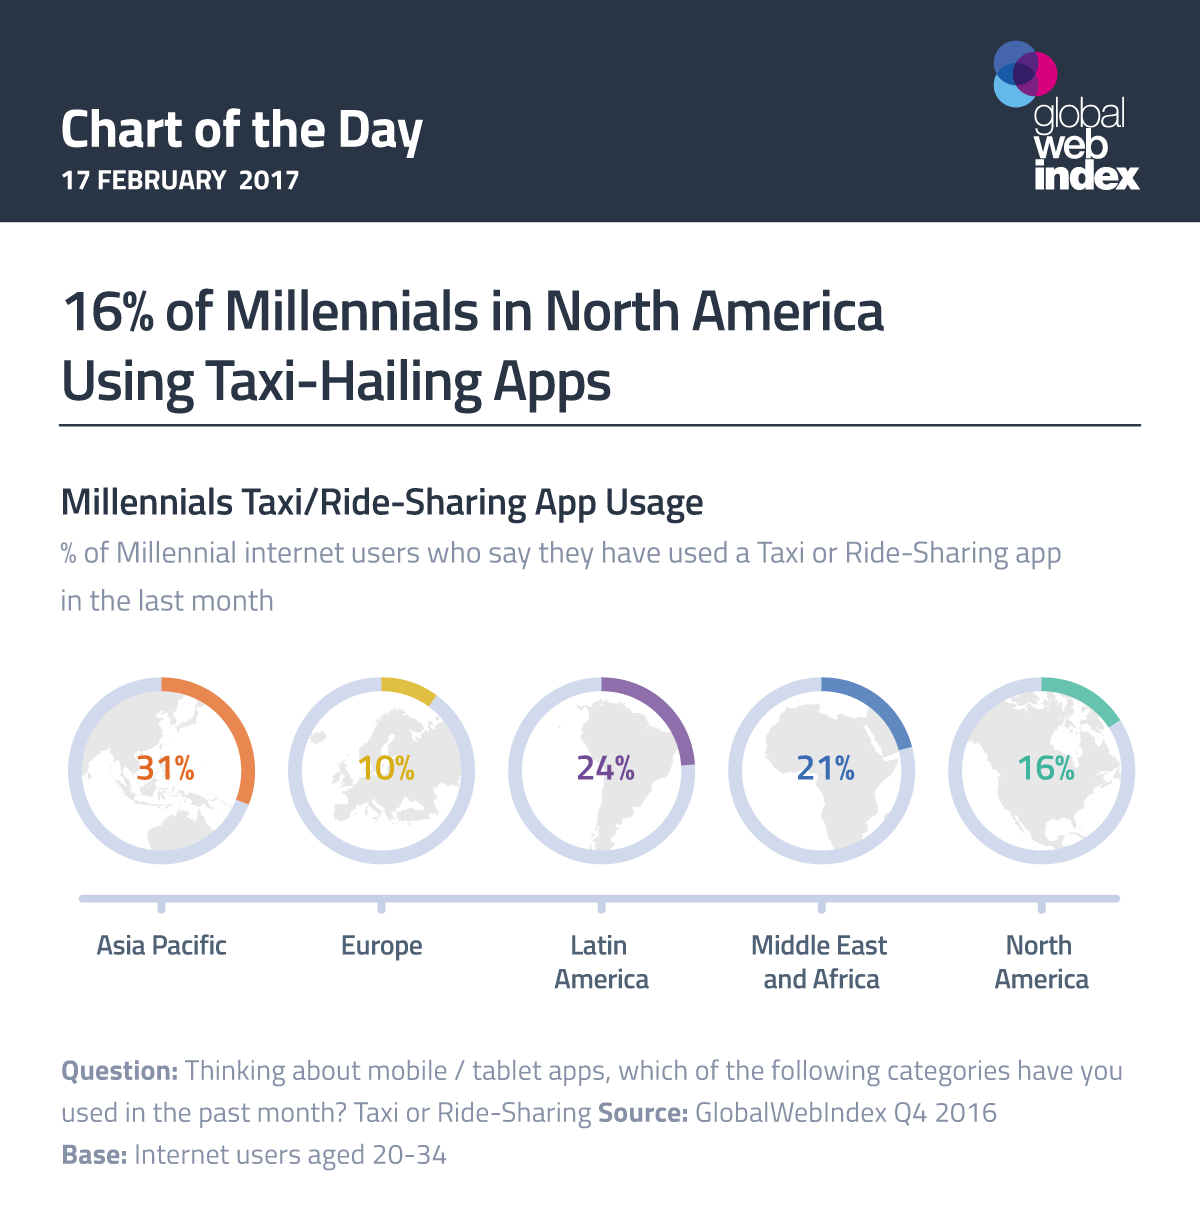 16% of Millennials in North America Using Taxi-Hailing Apps